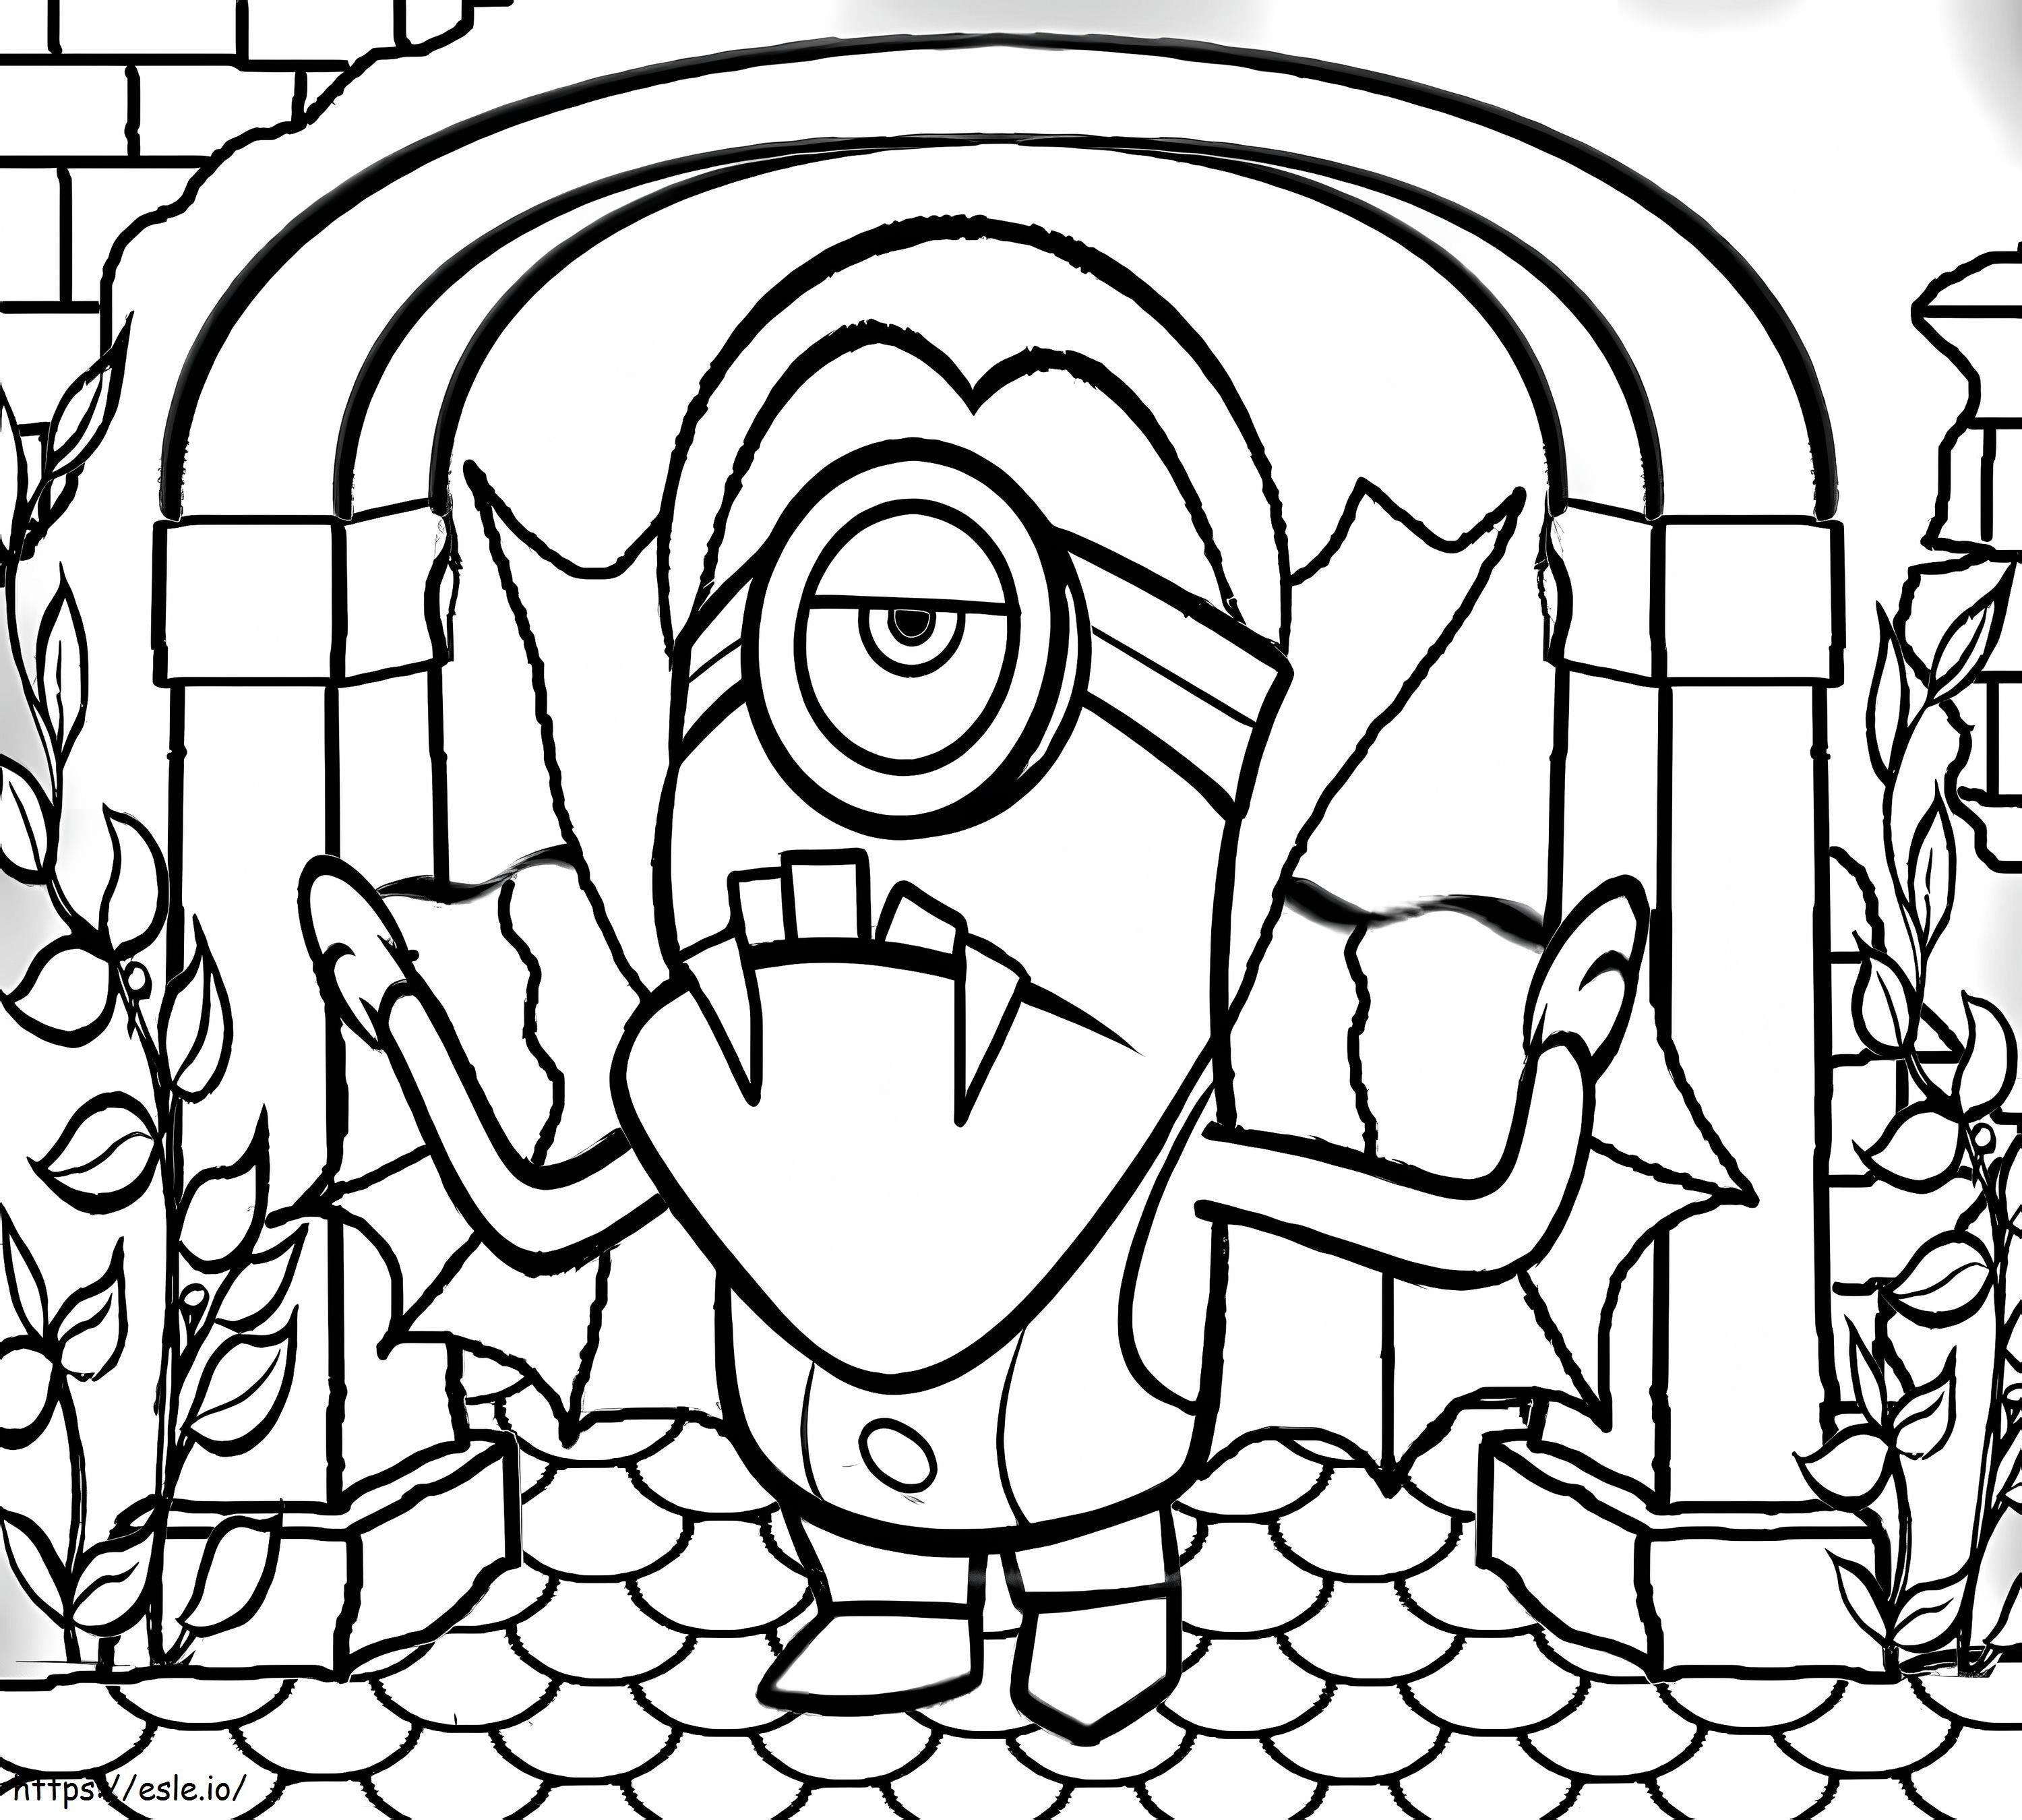 1539913954 Halloween Costumes With Minion Vampire Print Free coloring page